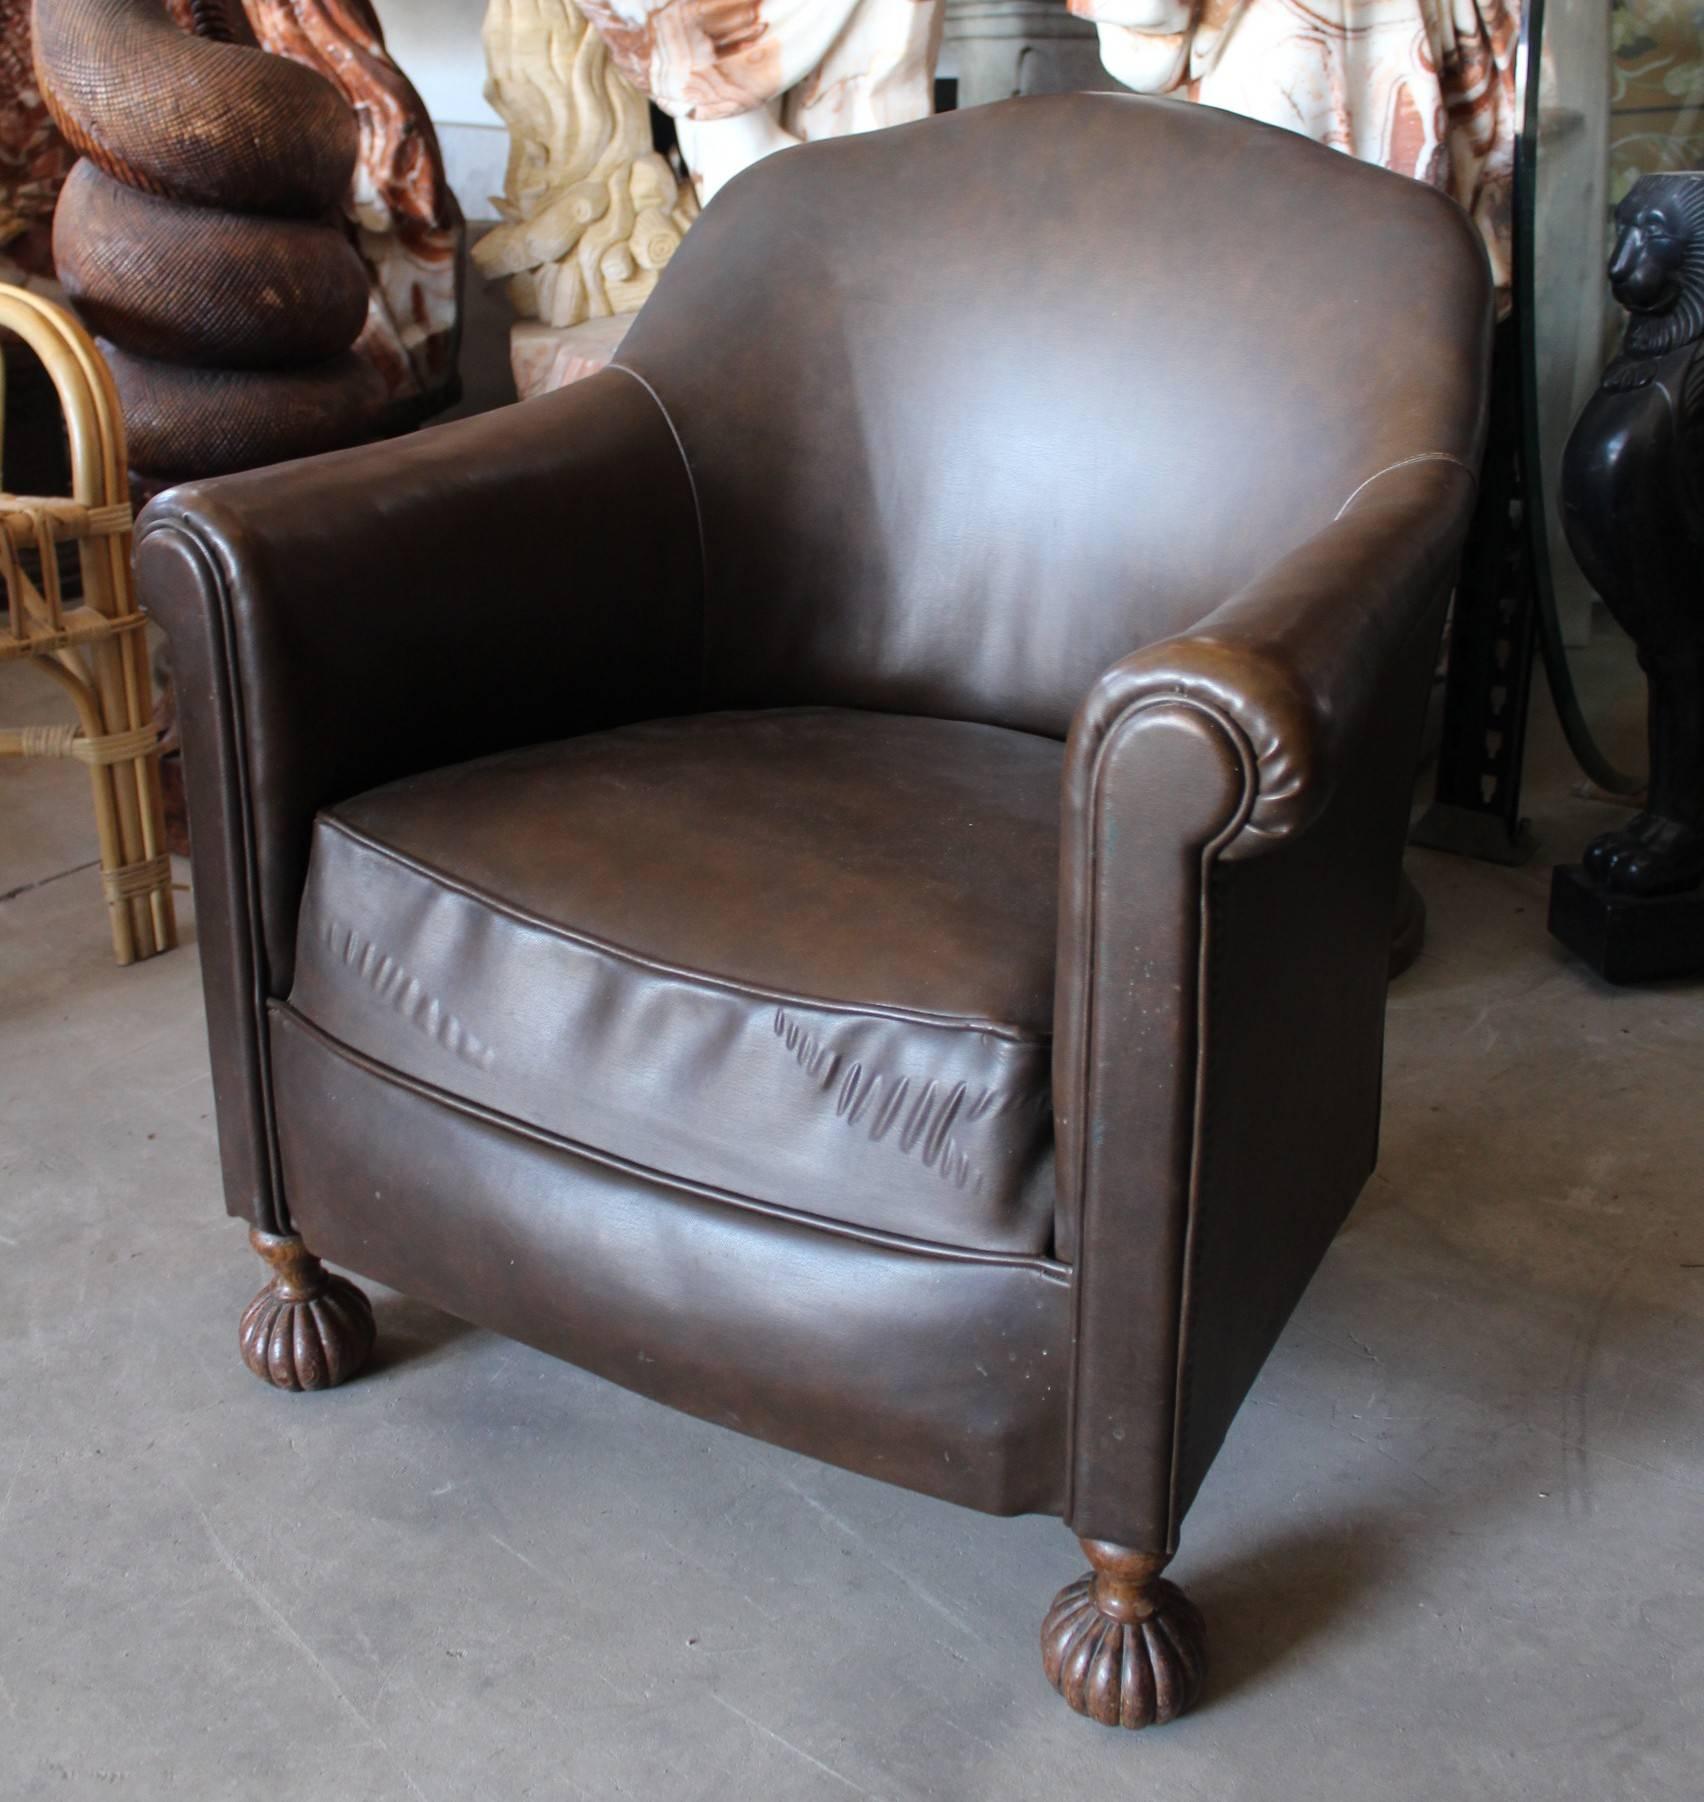 1950s English leather armchair with hand-carved wooden globular legs.
   